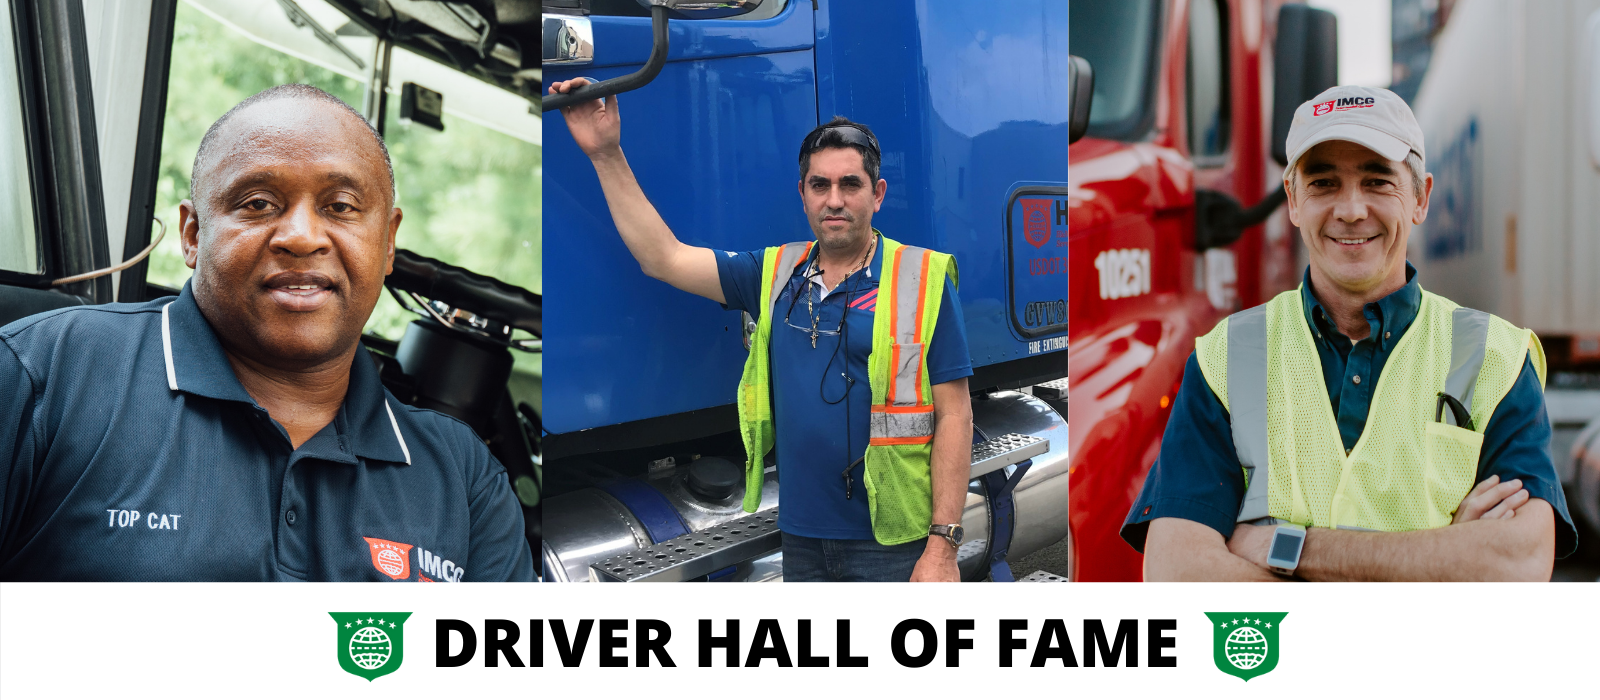 Introducing the IMC Companies Driver Hall of Fame Page!